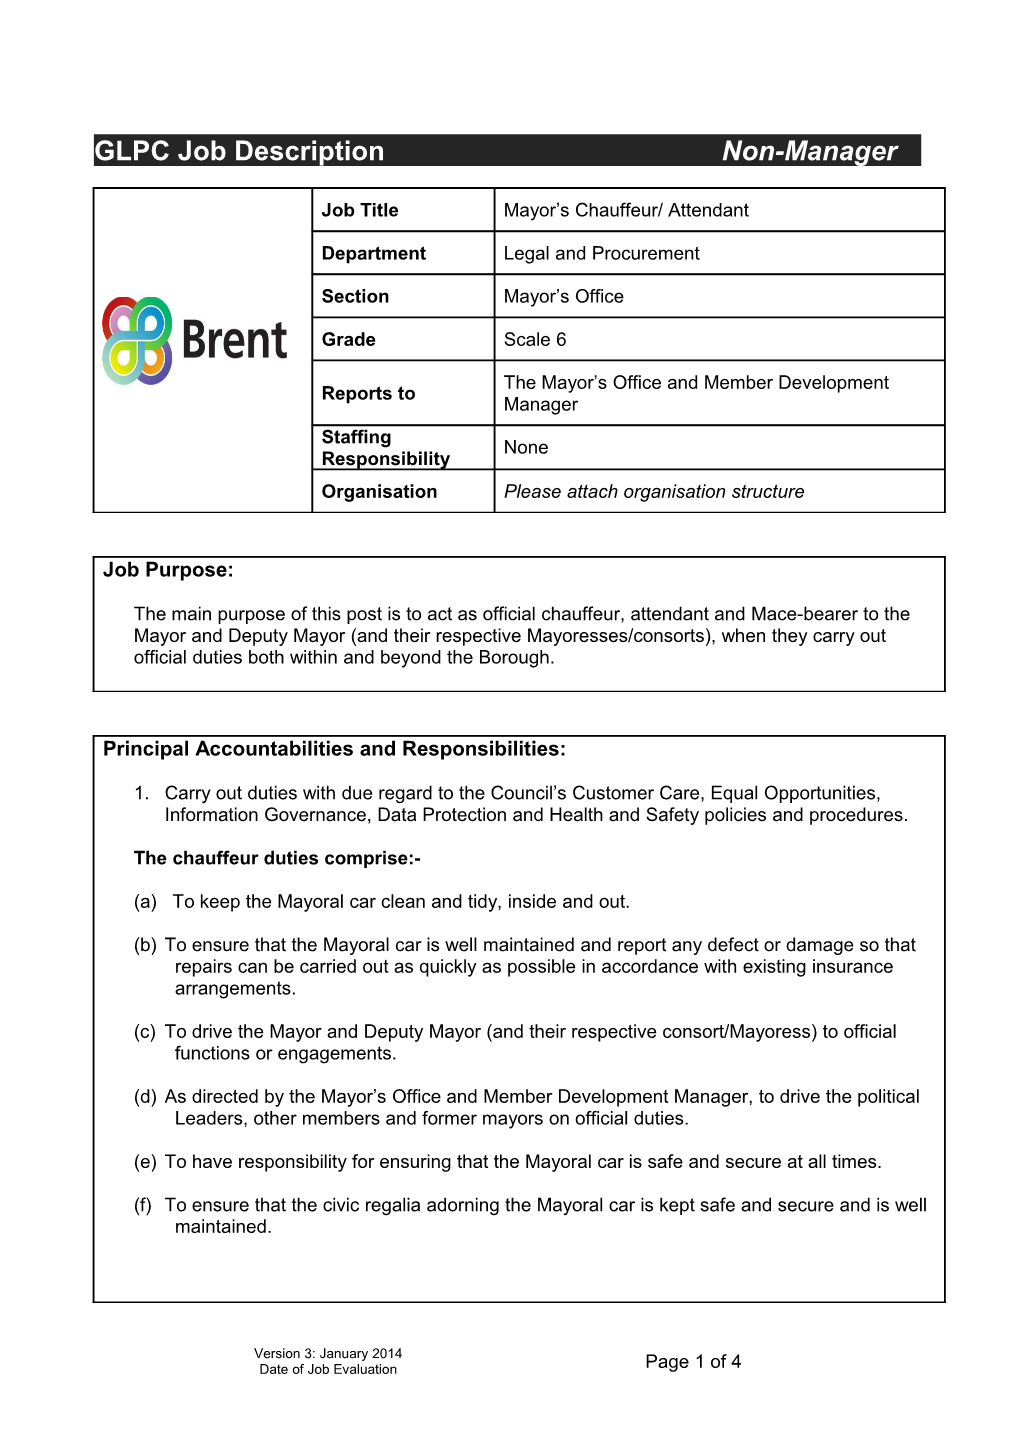 Application for Job Evaluation s2